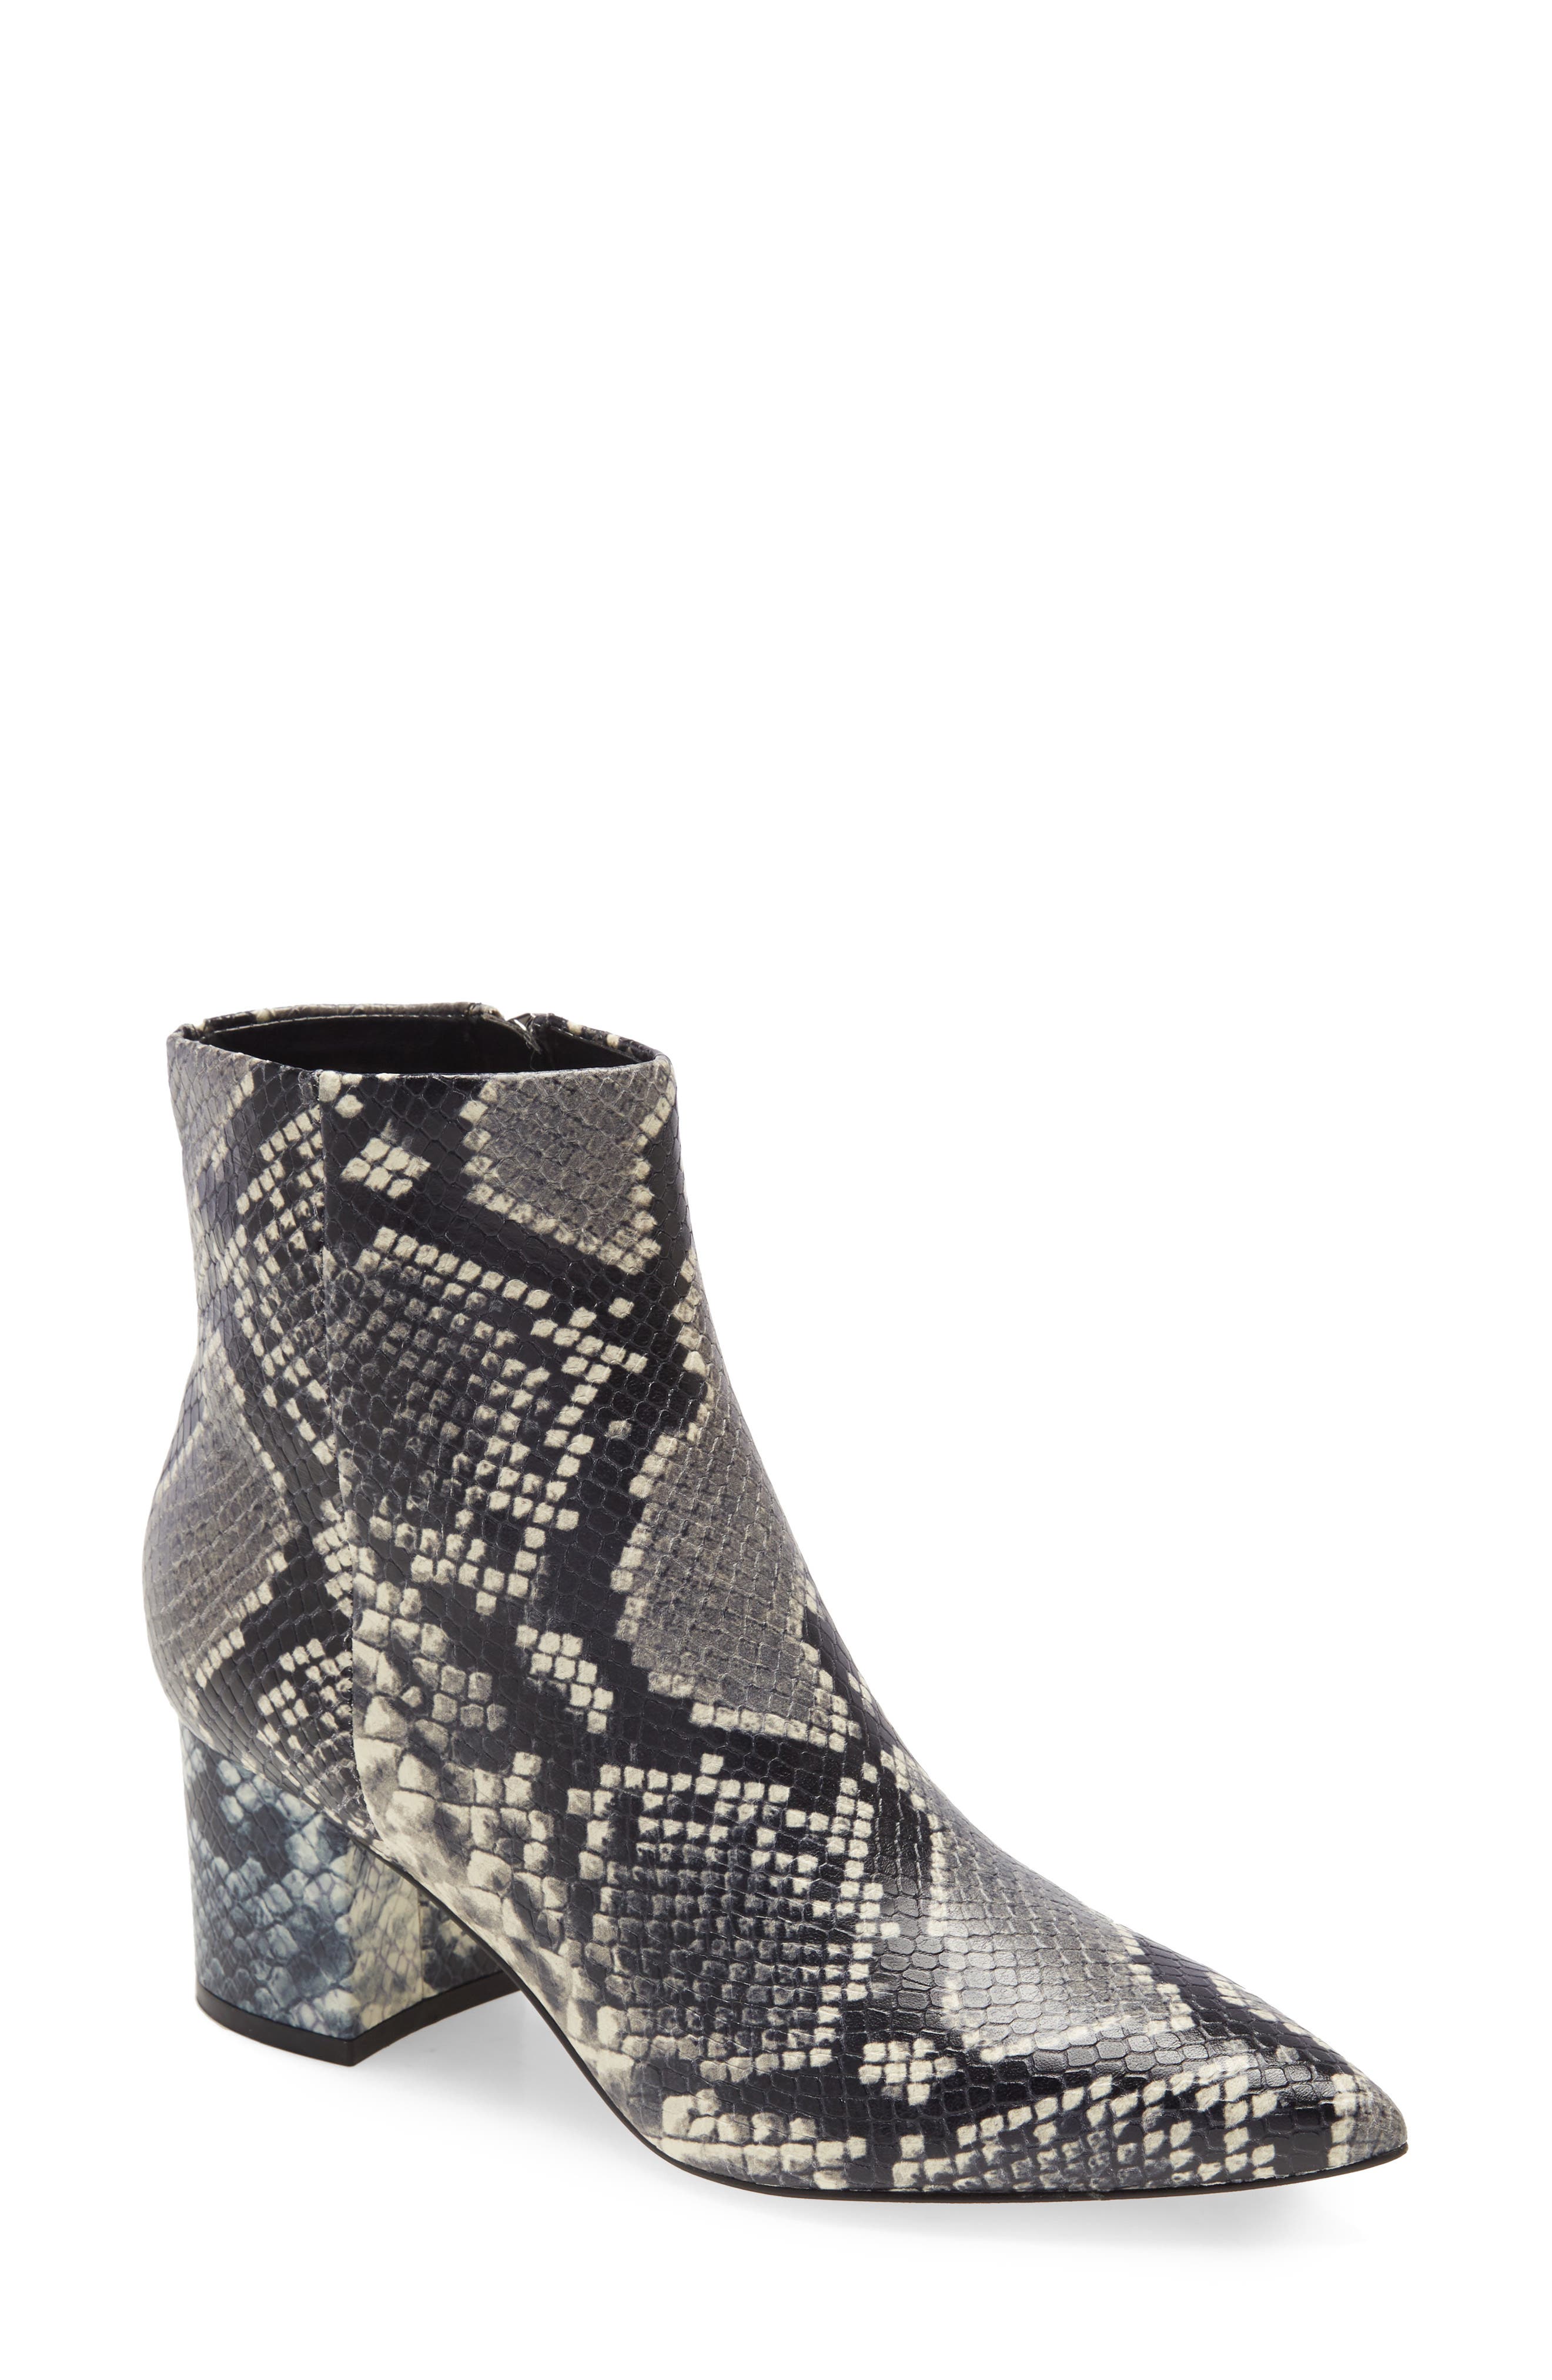 marc fisher ulani pointy toe bootie